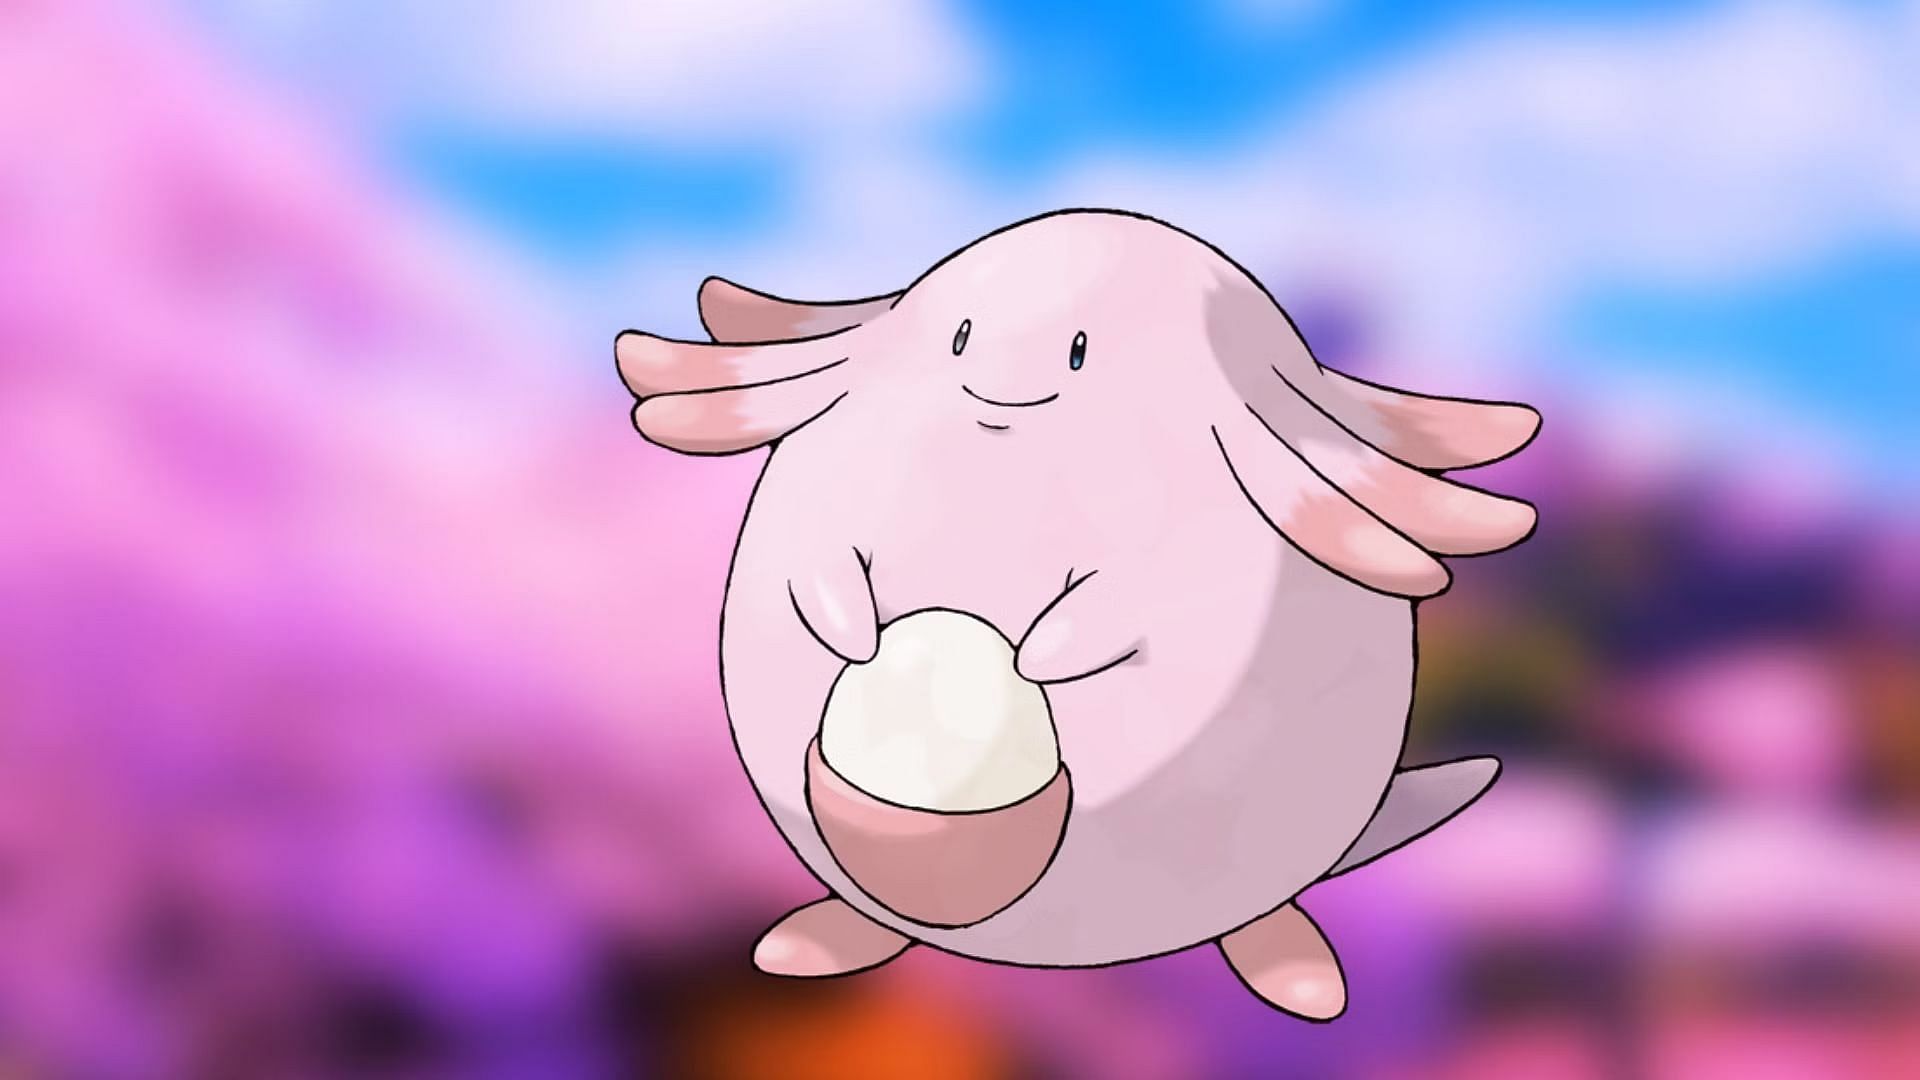 Chansey would be a perfect fit for a city clinic or hospital in Pokemon GO (Image via The Pokemon Company)